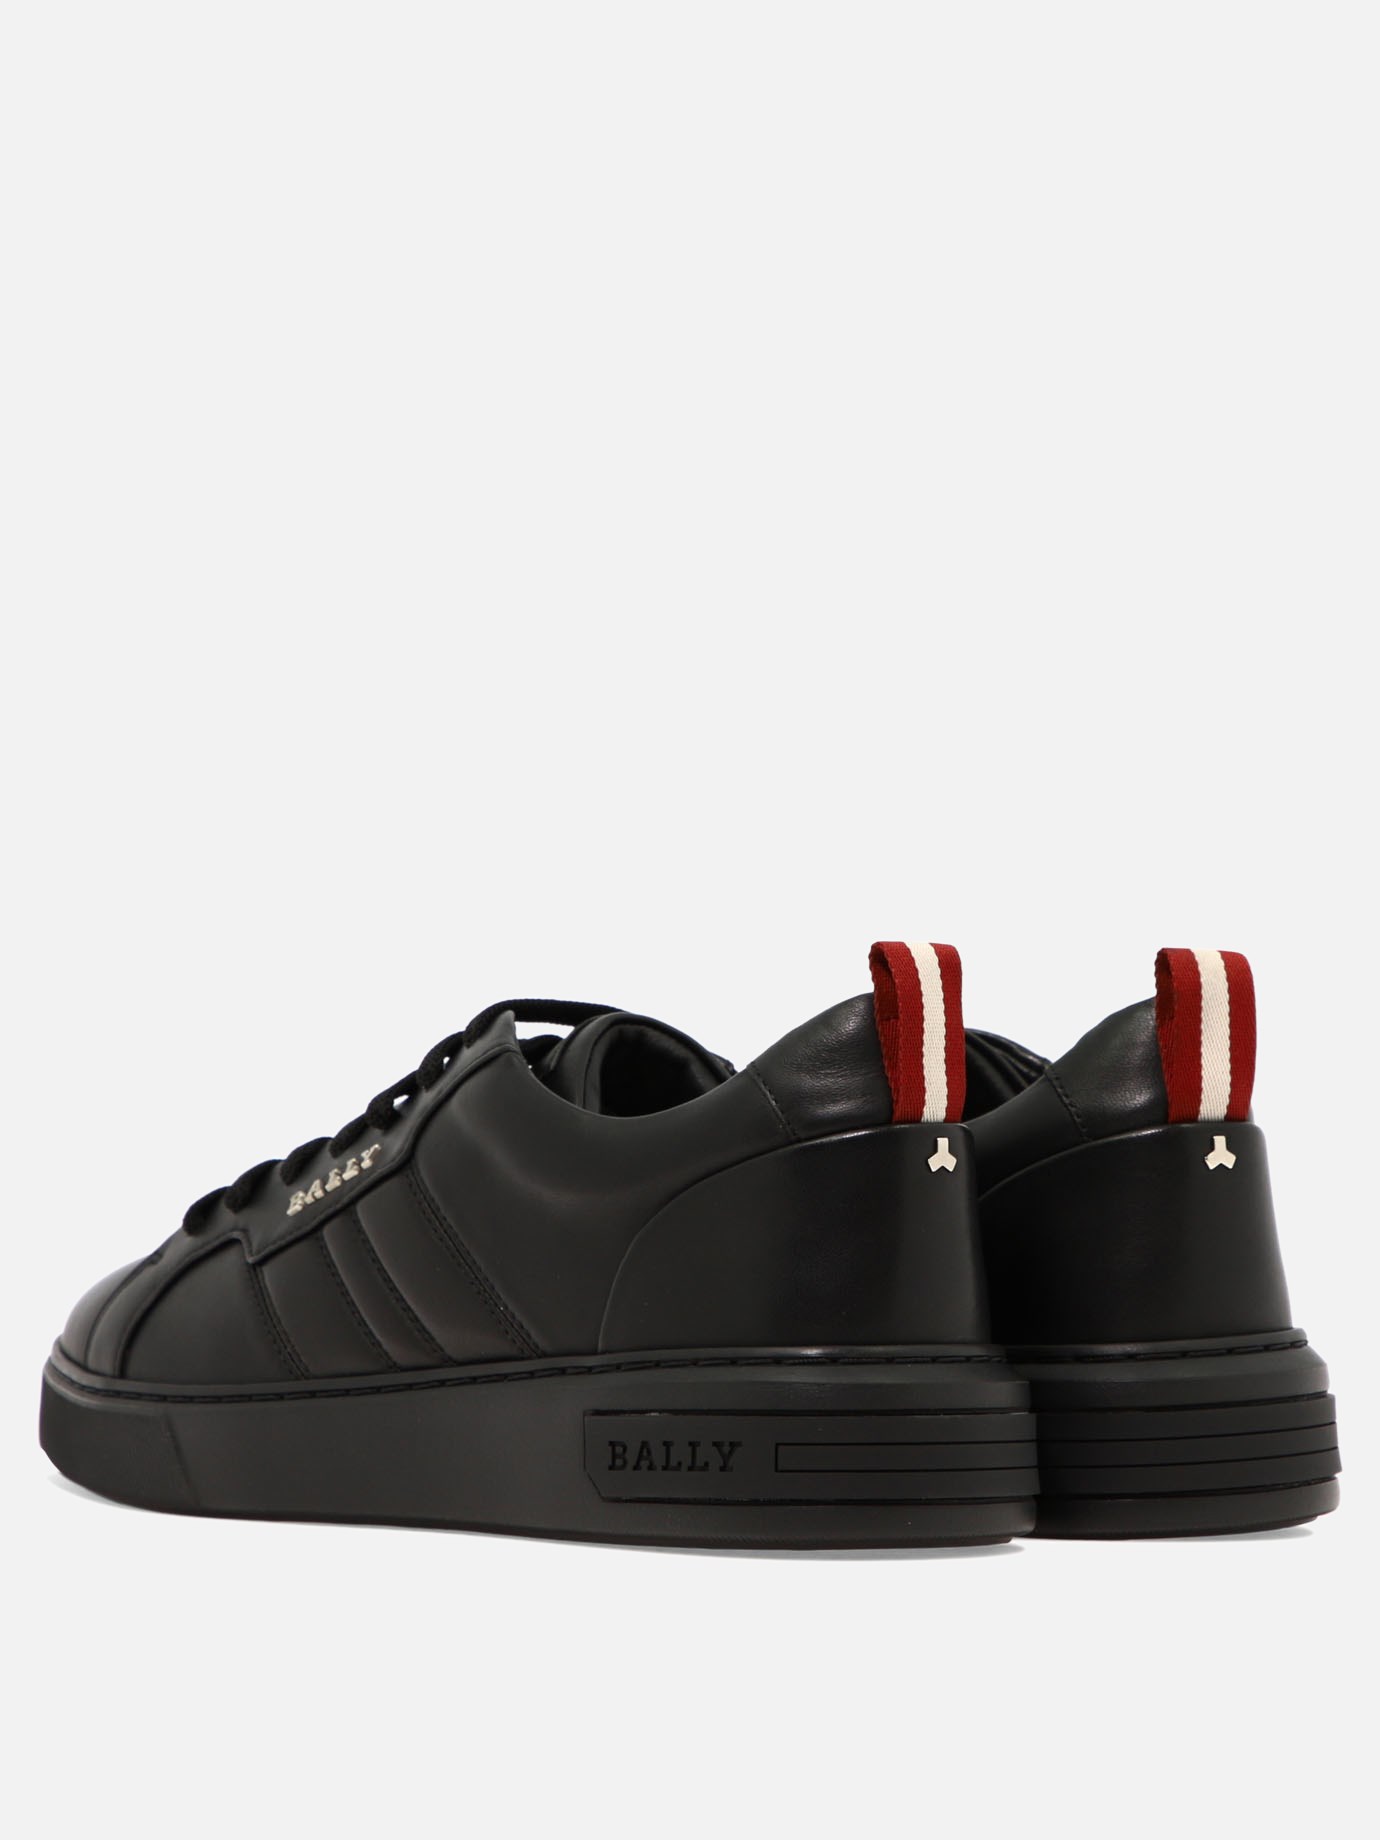  New Maxim  sneakers by Bally